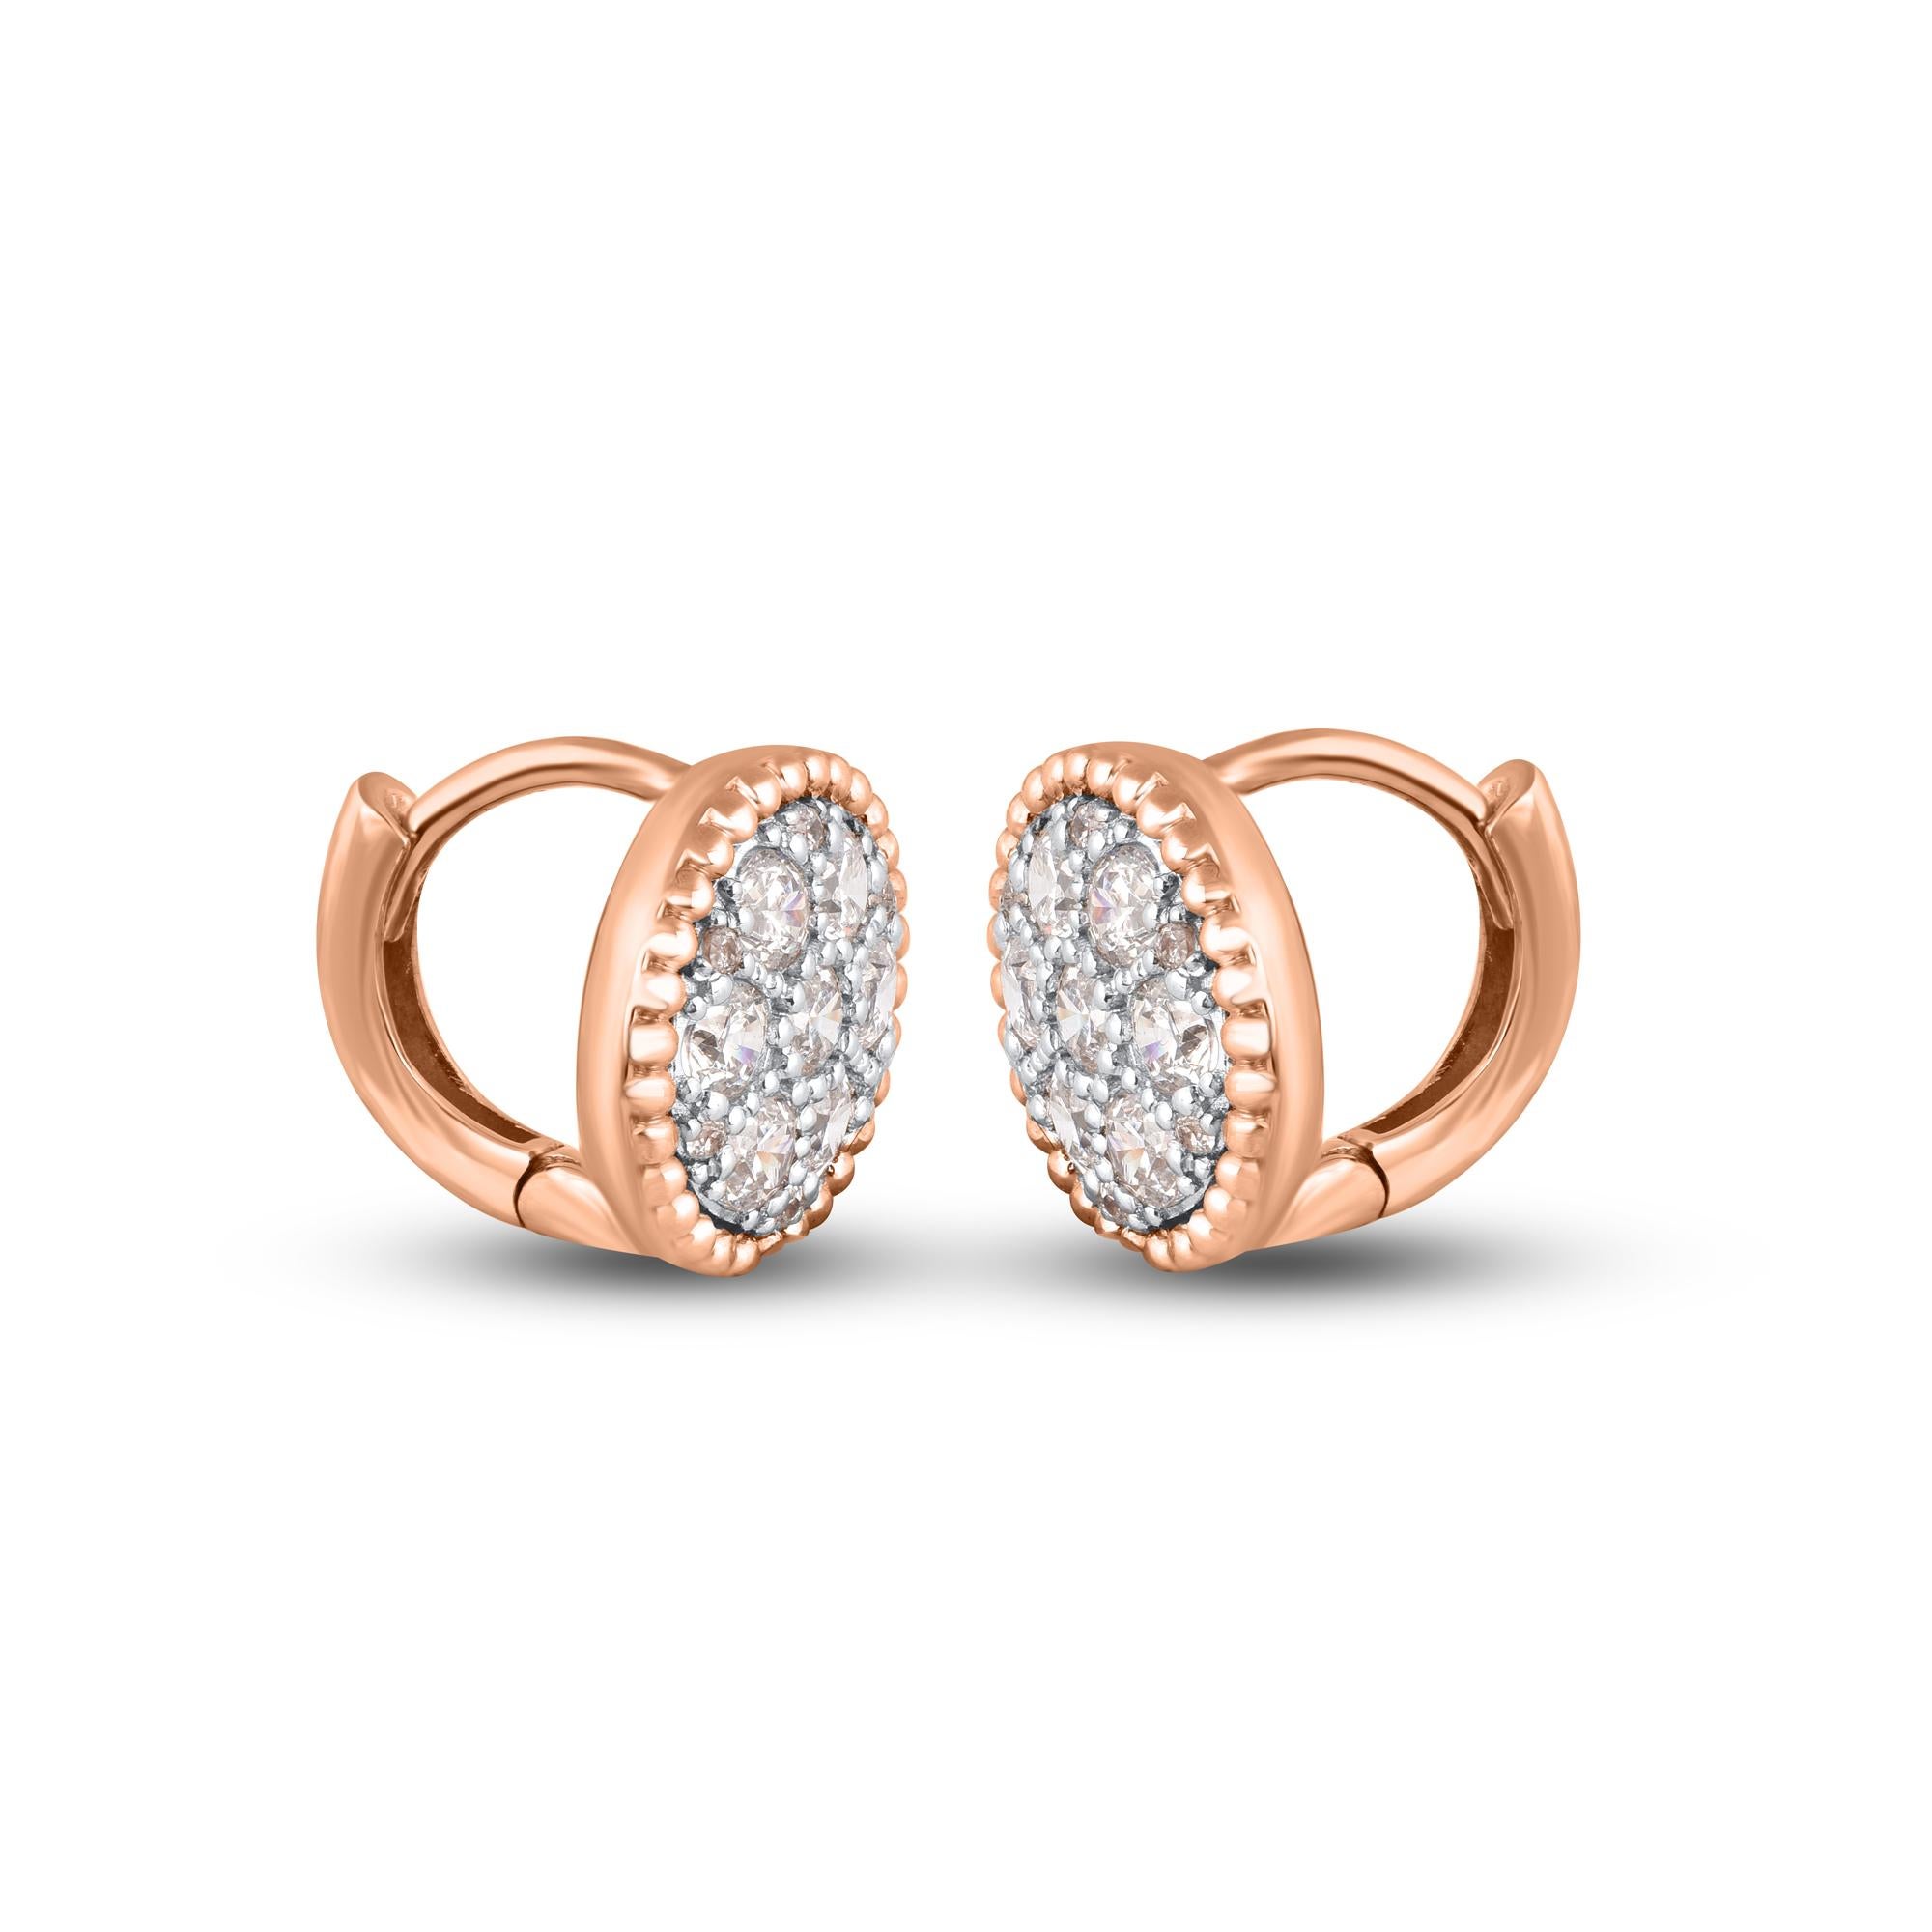 Ready for any occasions, these diamond frame stud earrings are shimmering look she'll wear with everything. The earrings is crafted from 14-karat gold in your choice of white, rose, or yellow, and features Round-26 Natural white diamond set in Prong